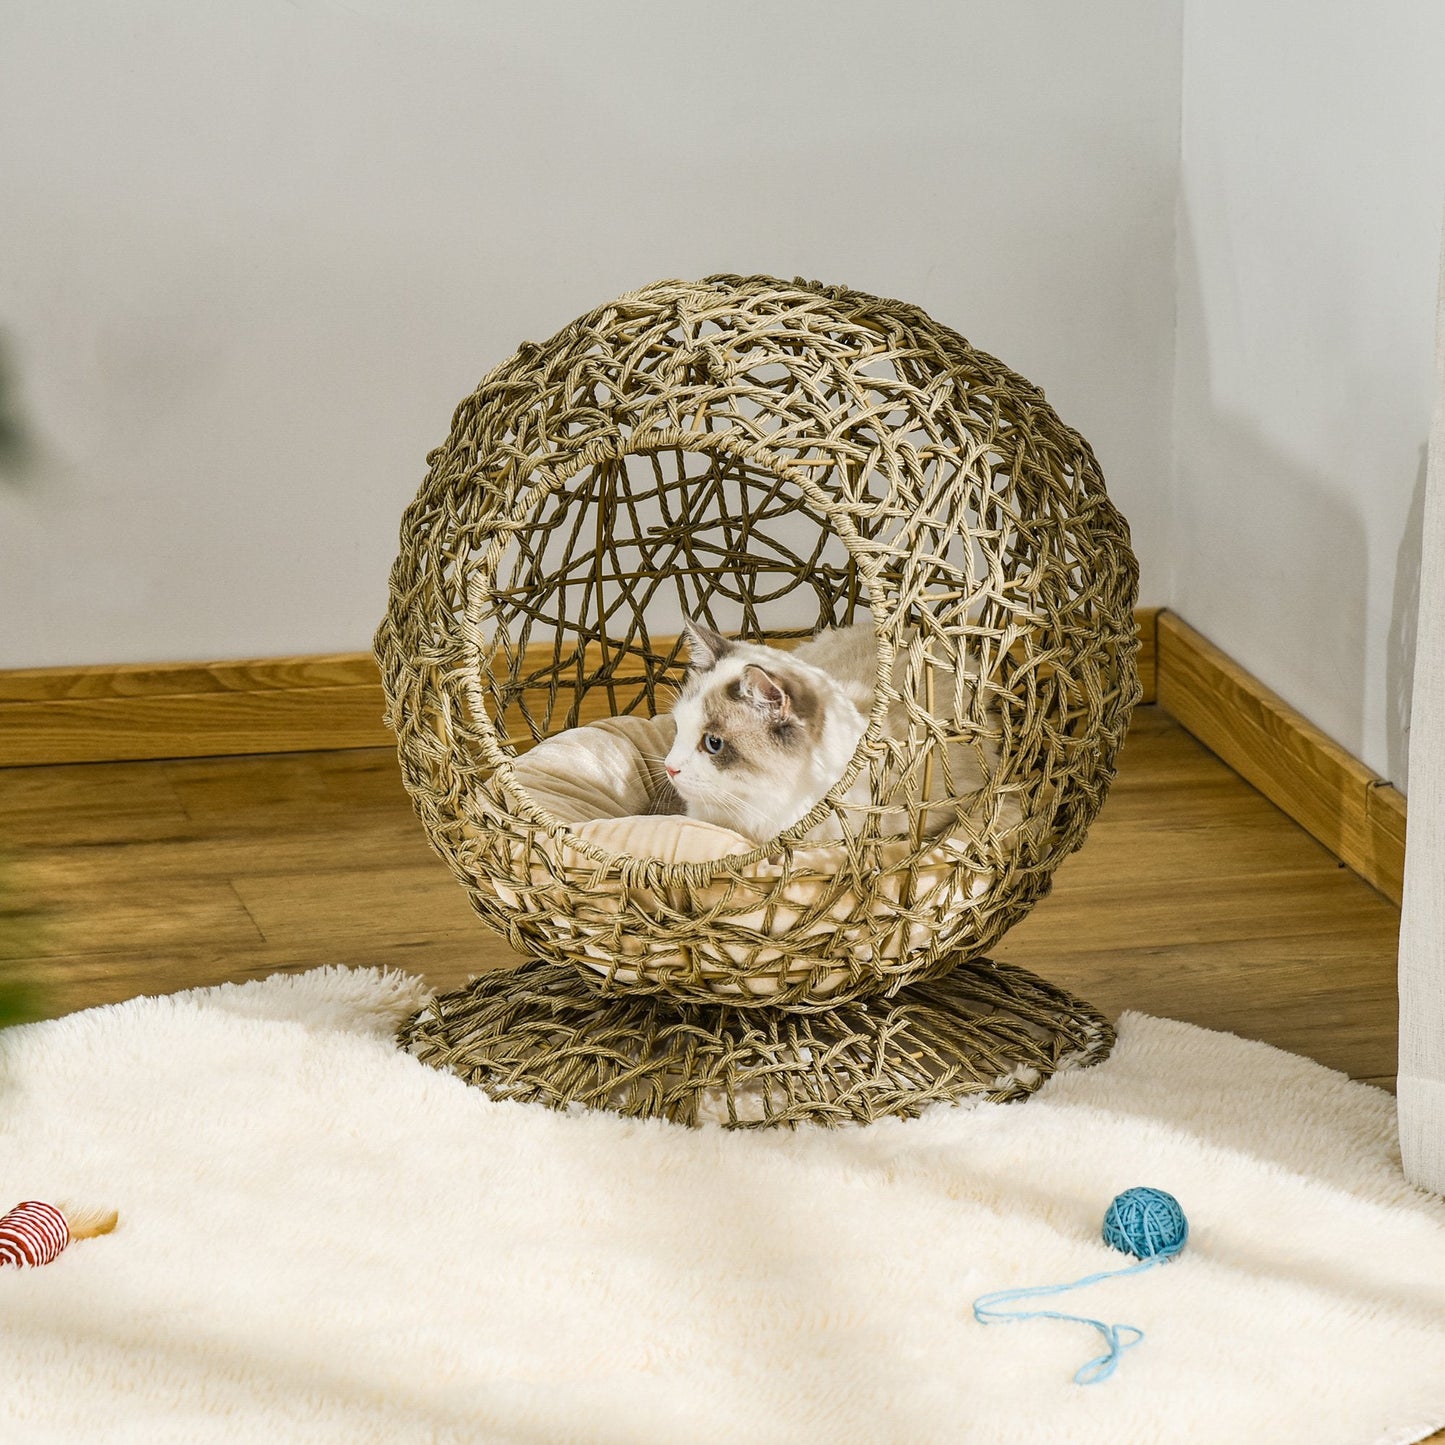 -PawHut Wicker Cat Bed Elevated Rattan Kitten Basket Pet Den. House Cozy Cave with Soft Cushion Brown - Outdoor Style Company